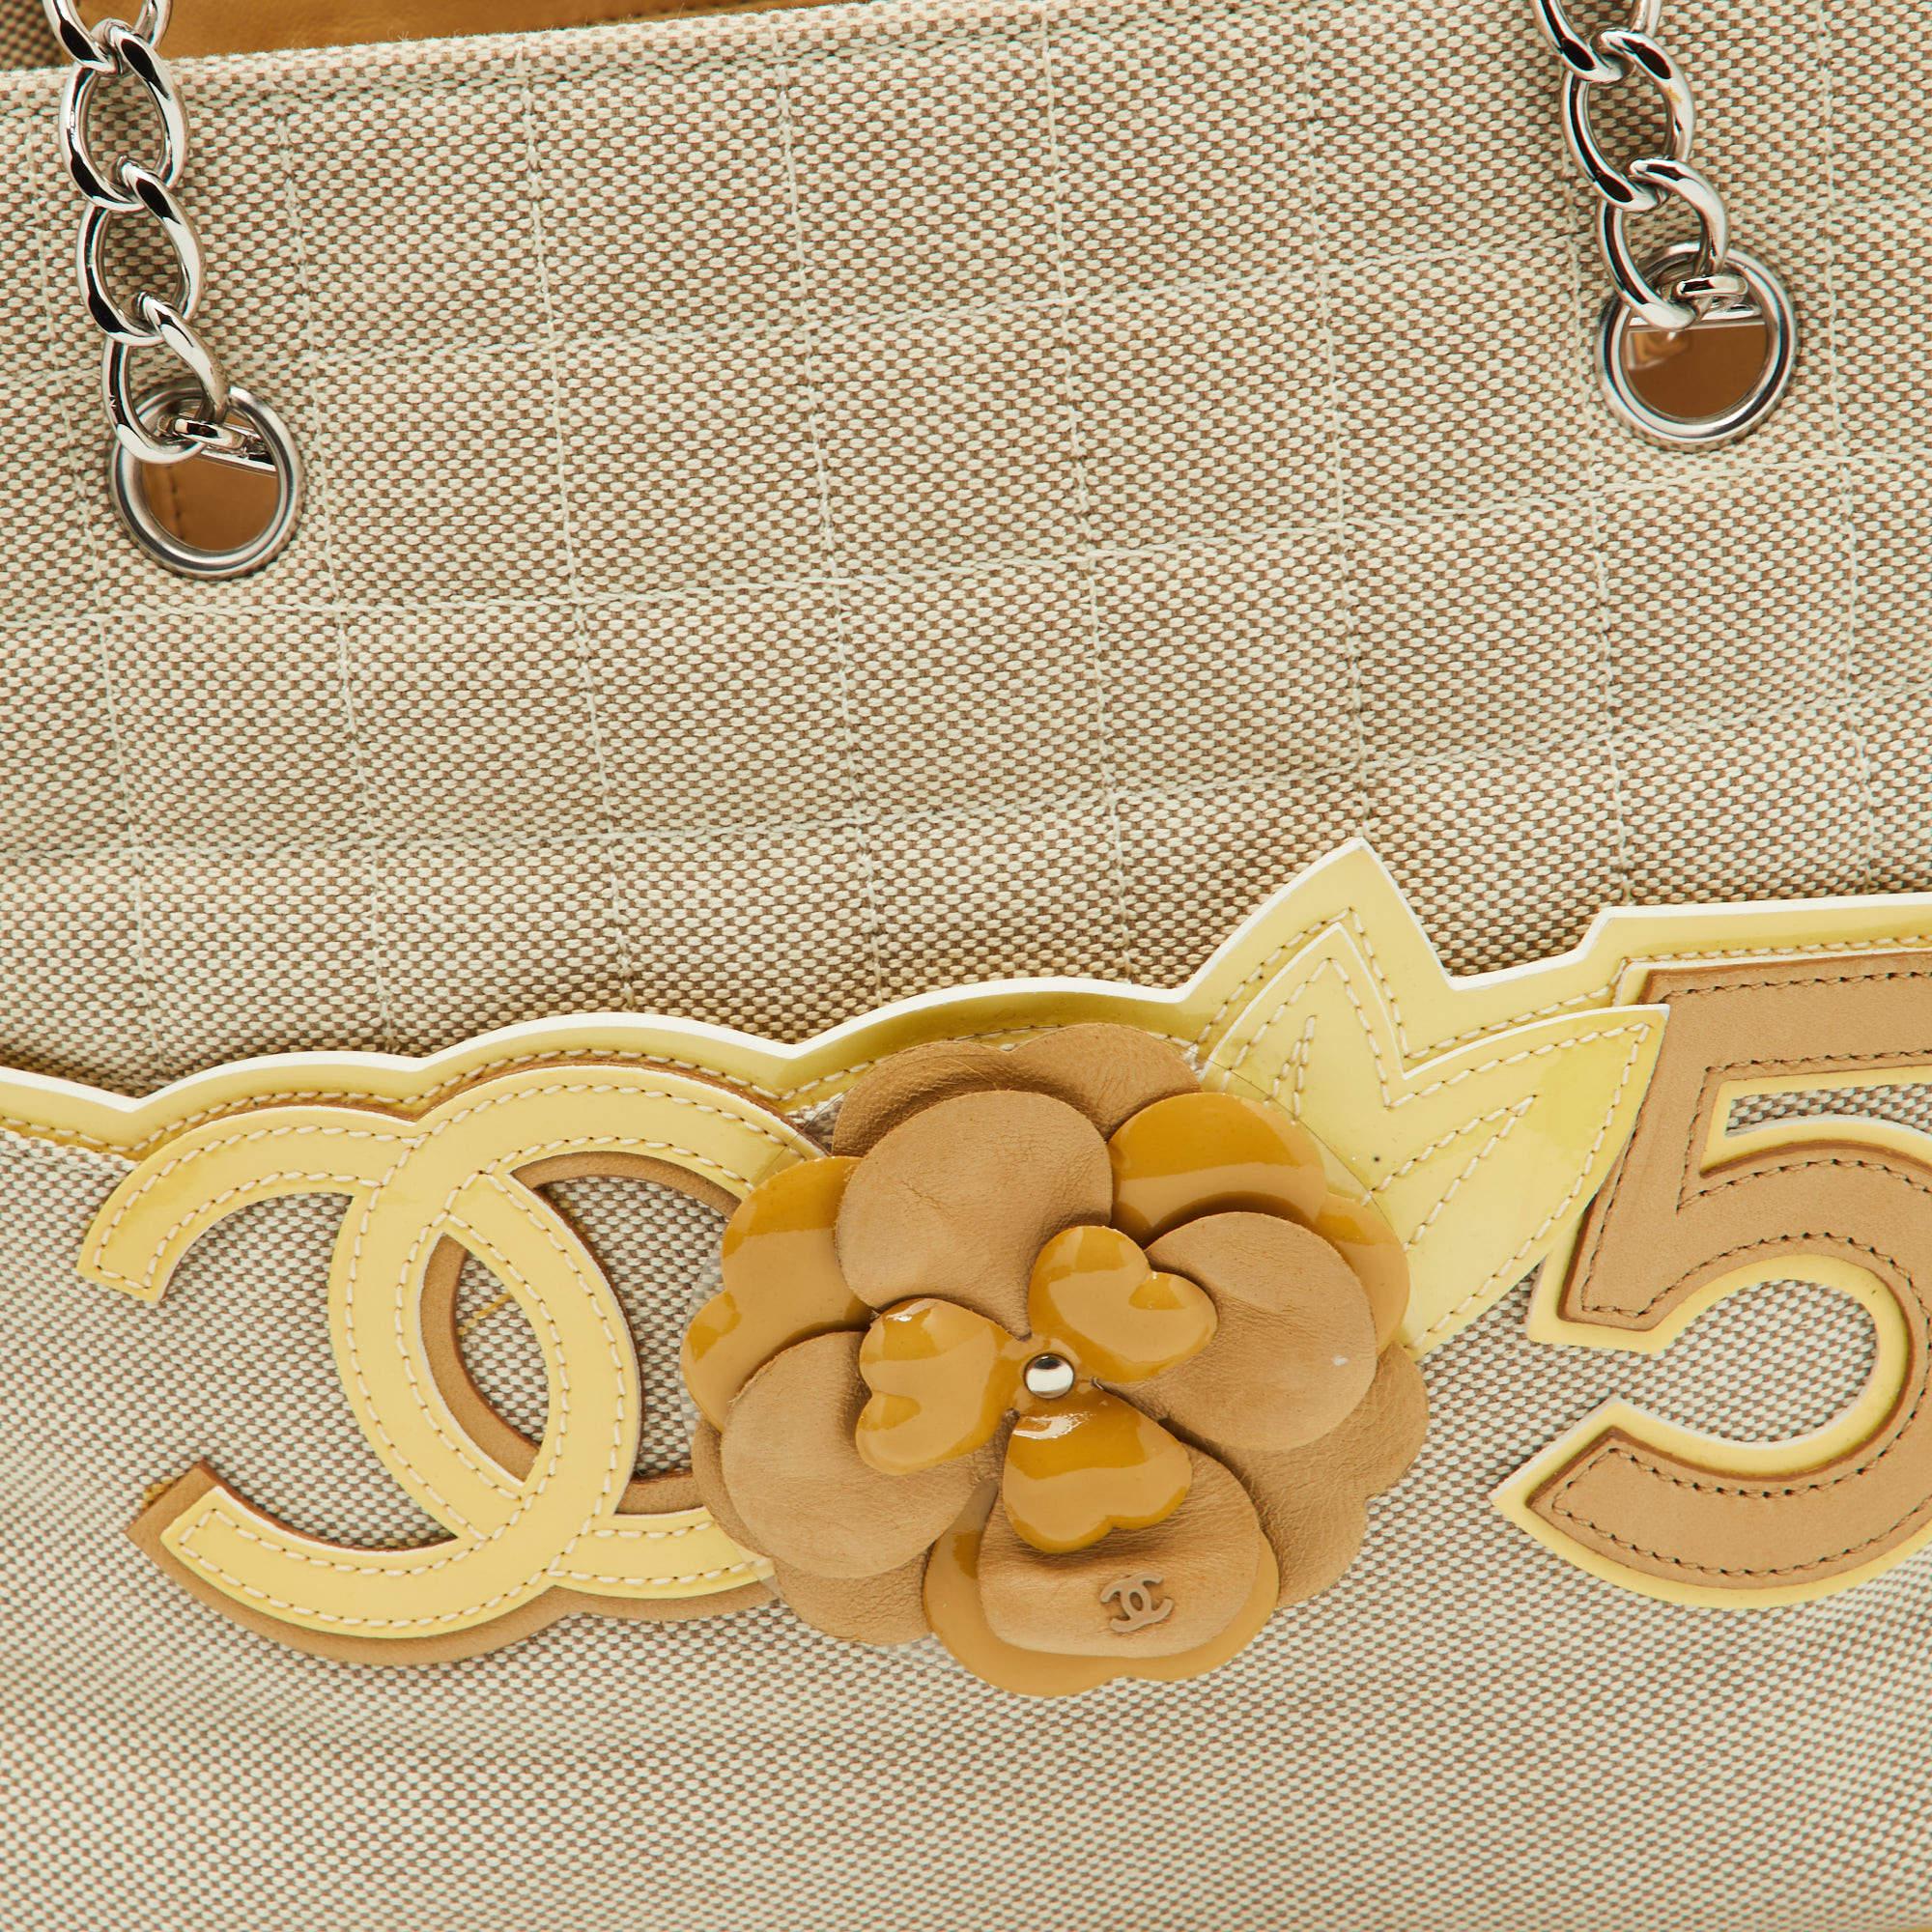 Chanel Beige/Yellow Canvas and Patent Leather Camellia No.5 Tote 1